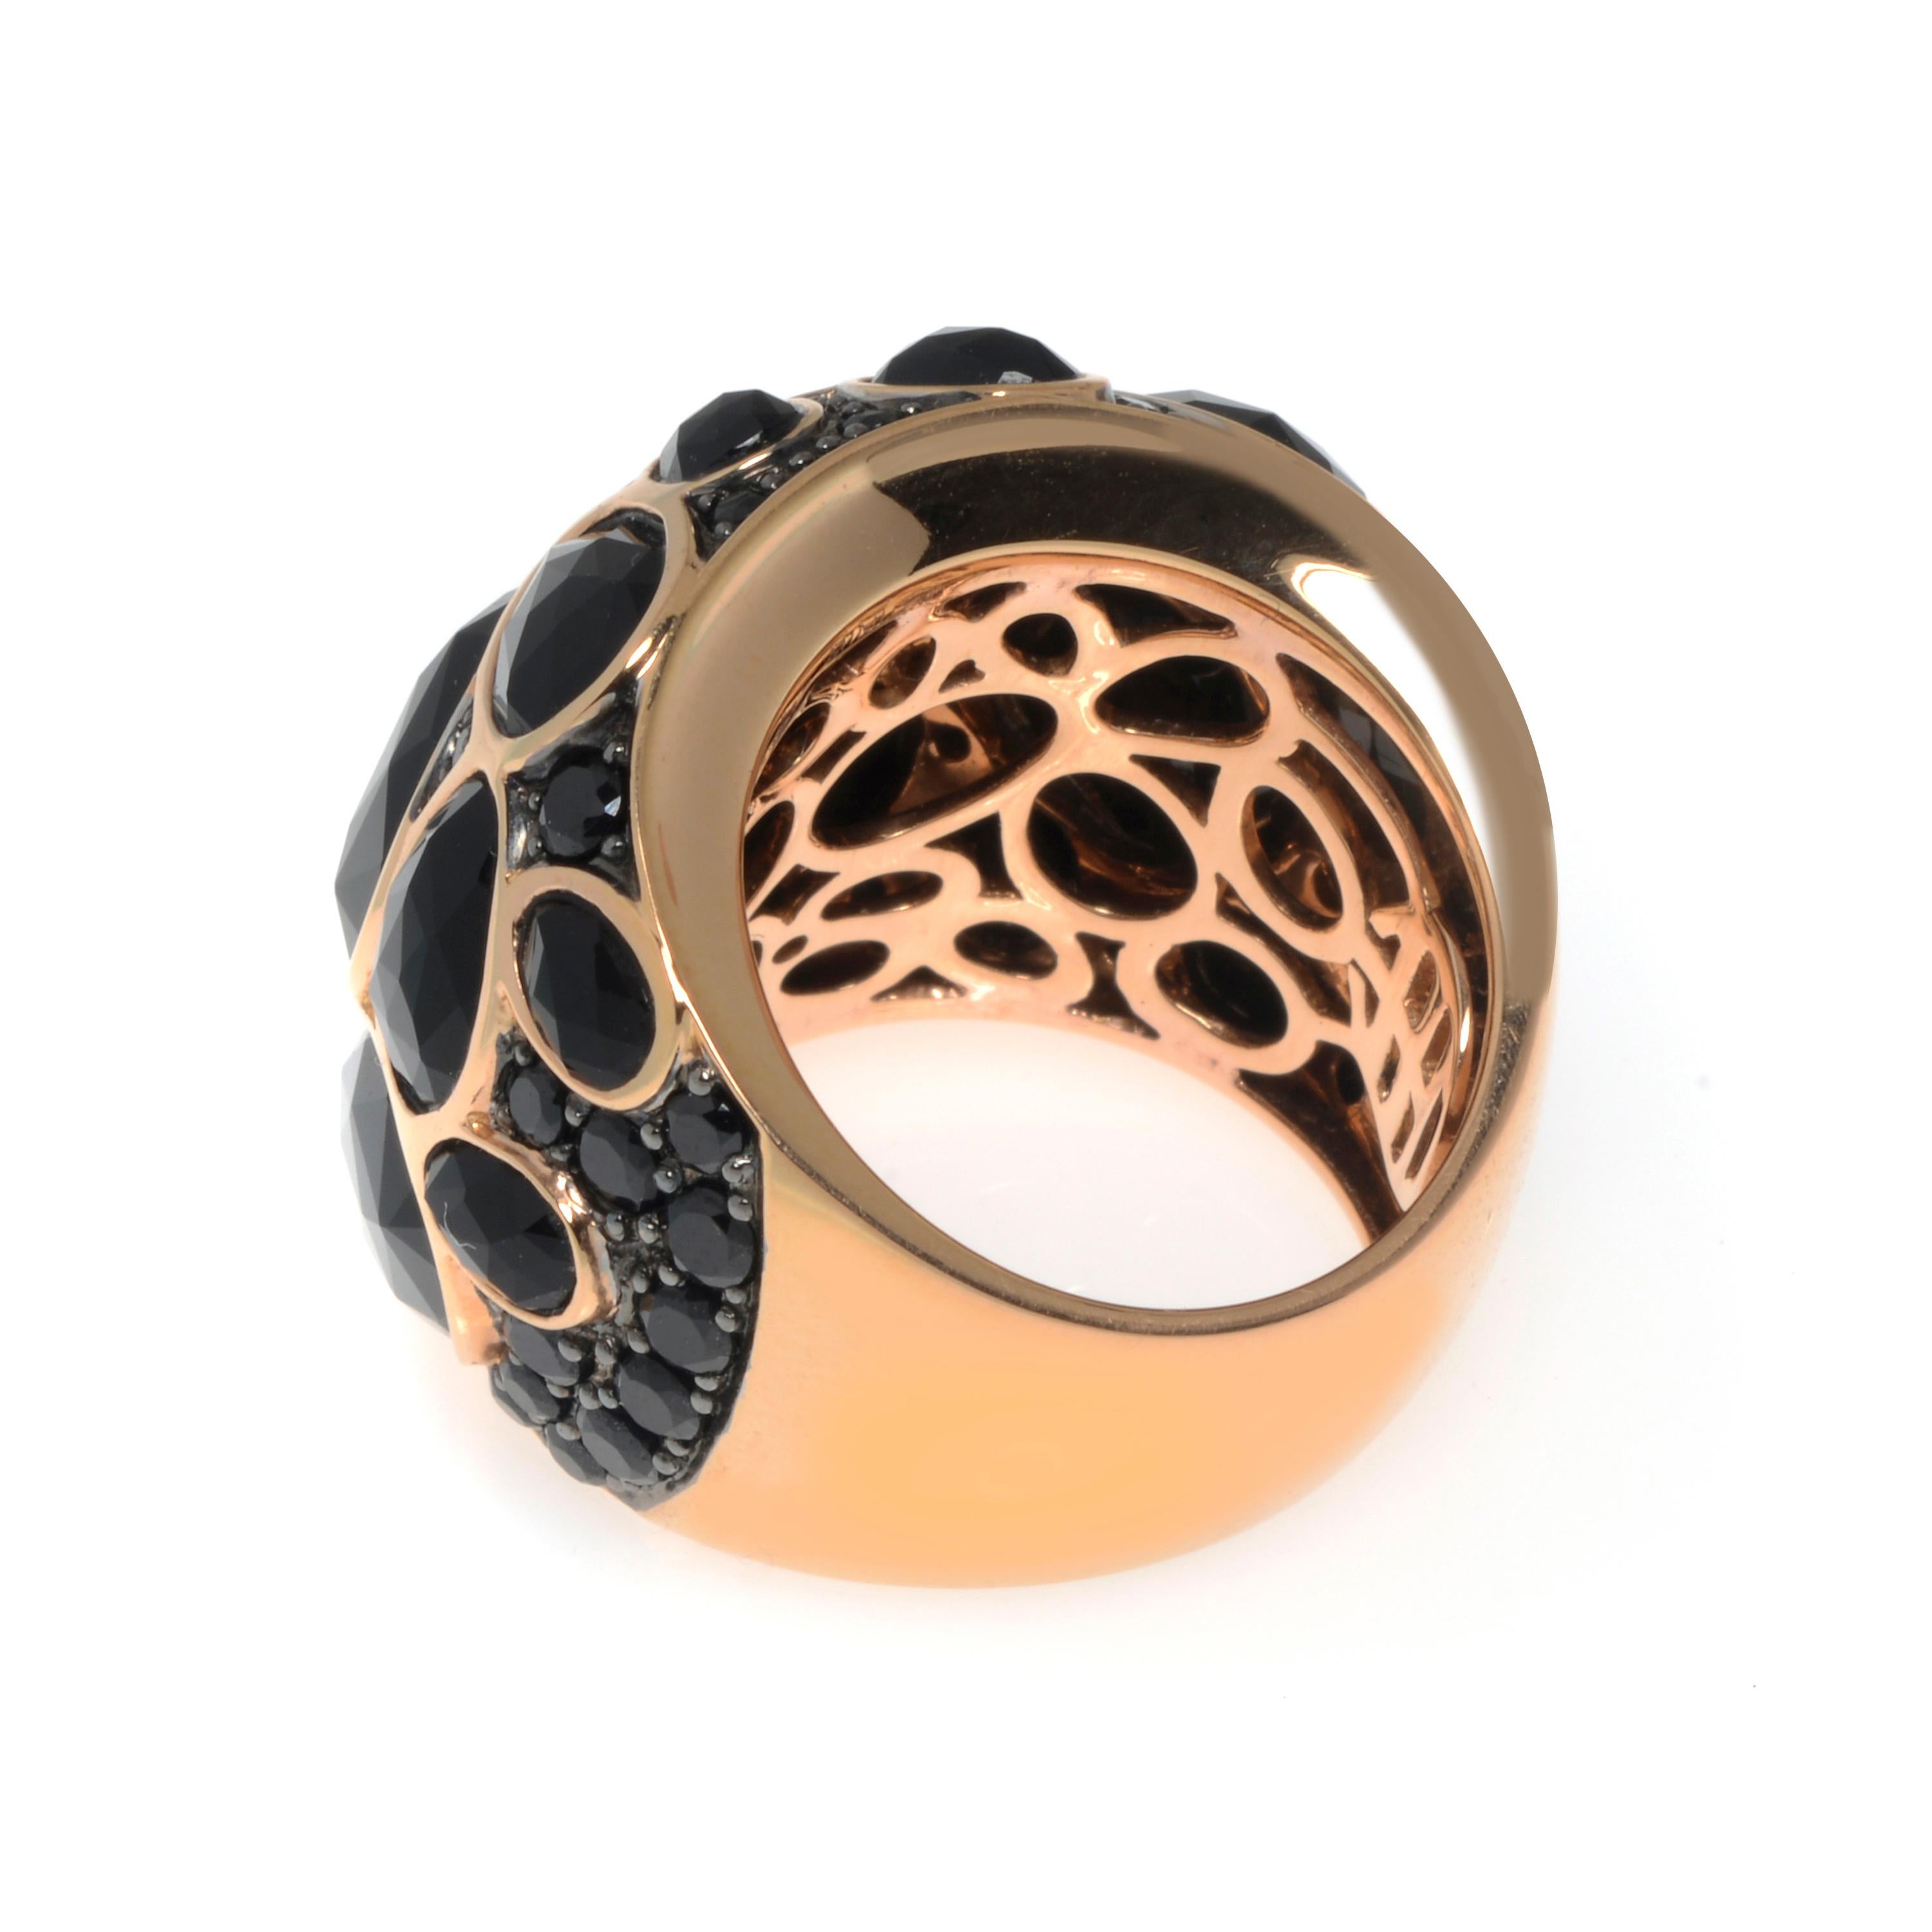 Contemporary Mimi Milano Talita 18K Rose Gold and Agate Ring Sz 6.25 For Sale